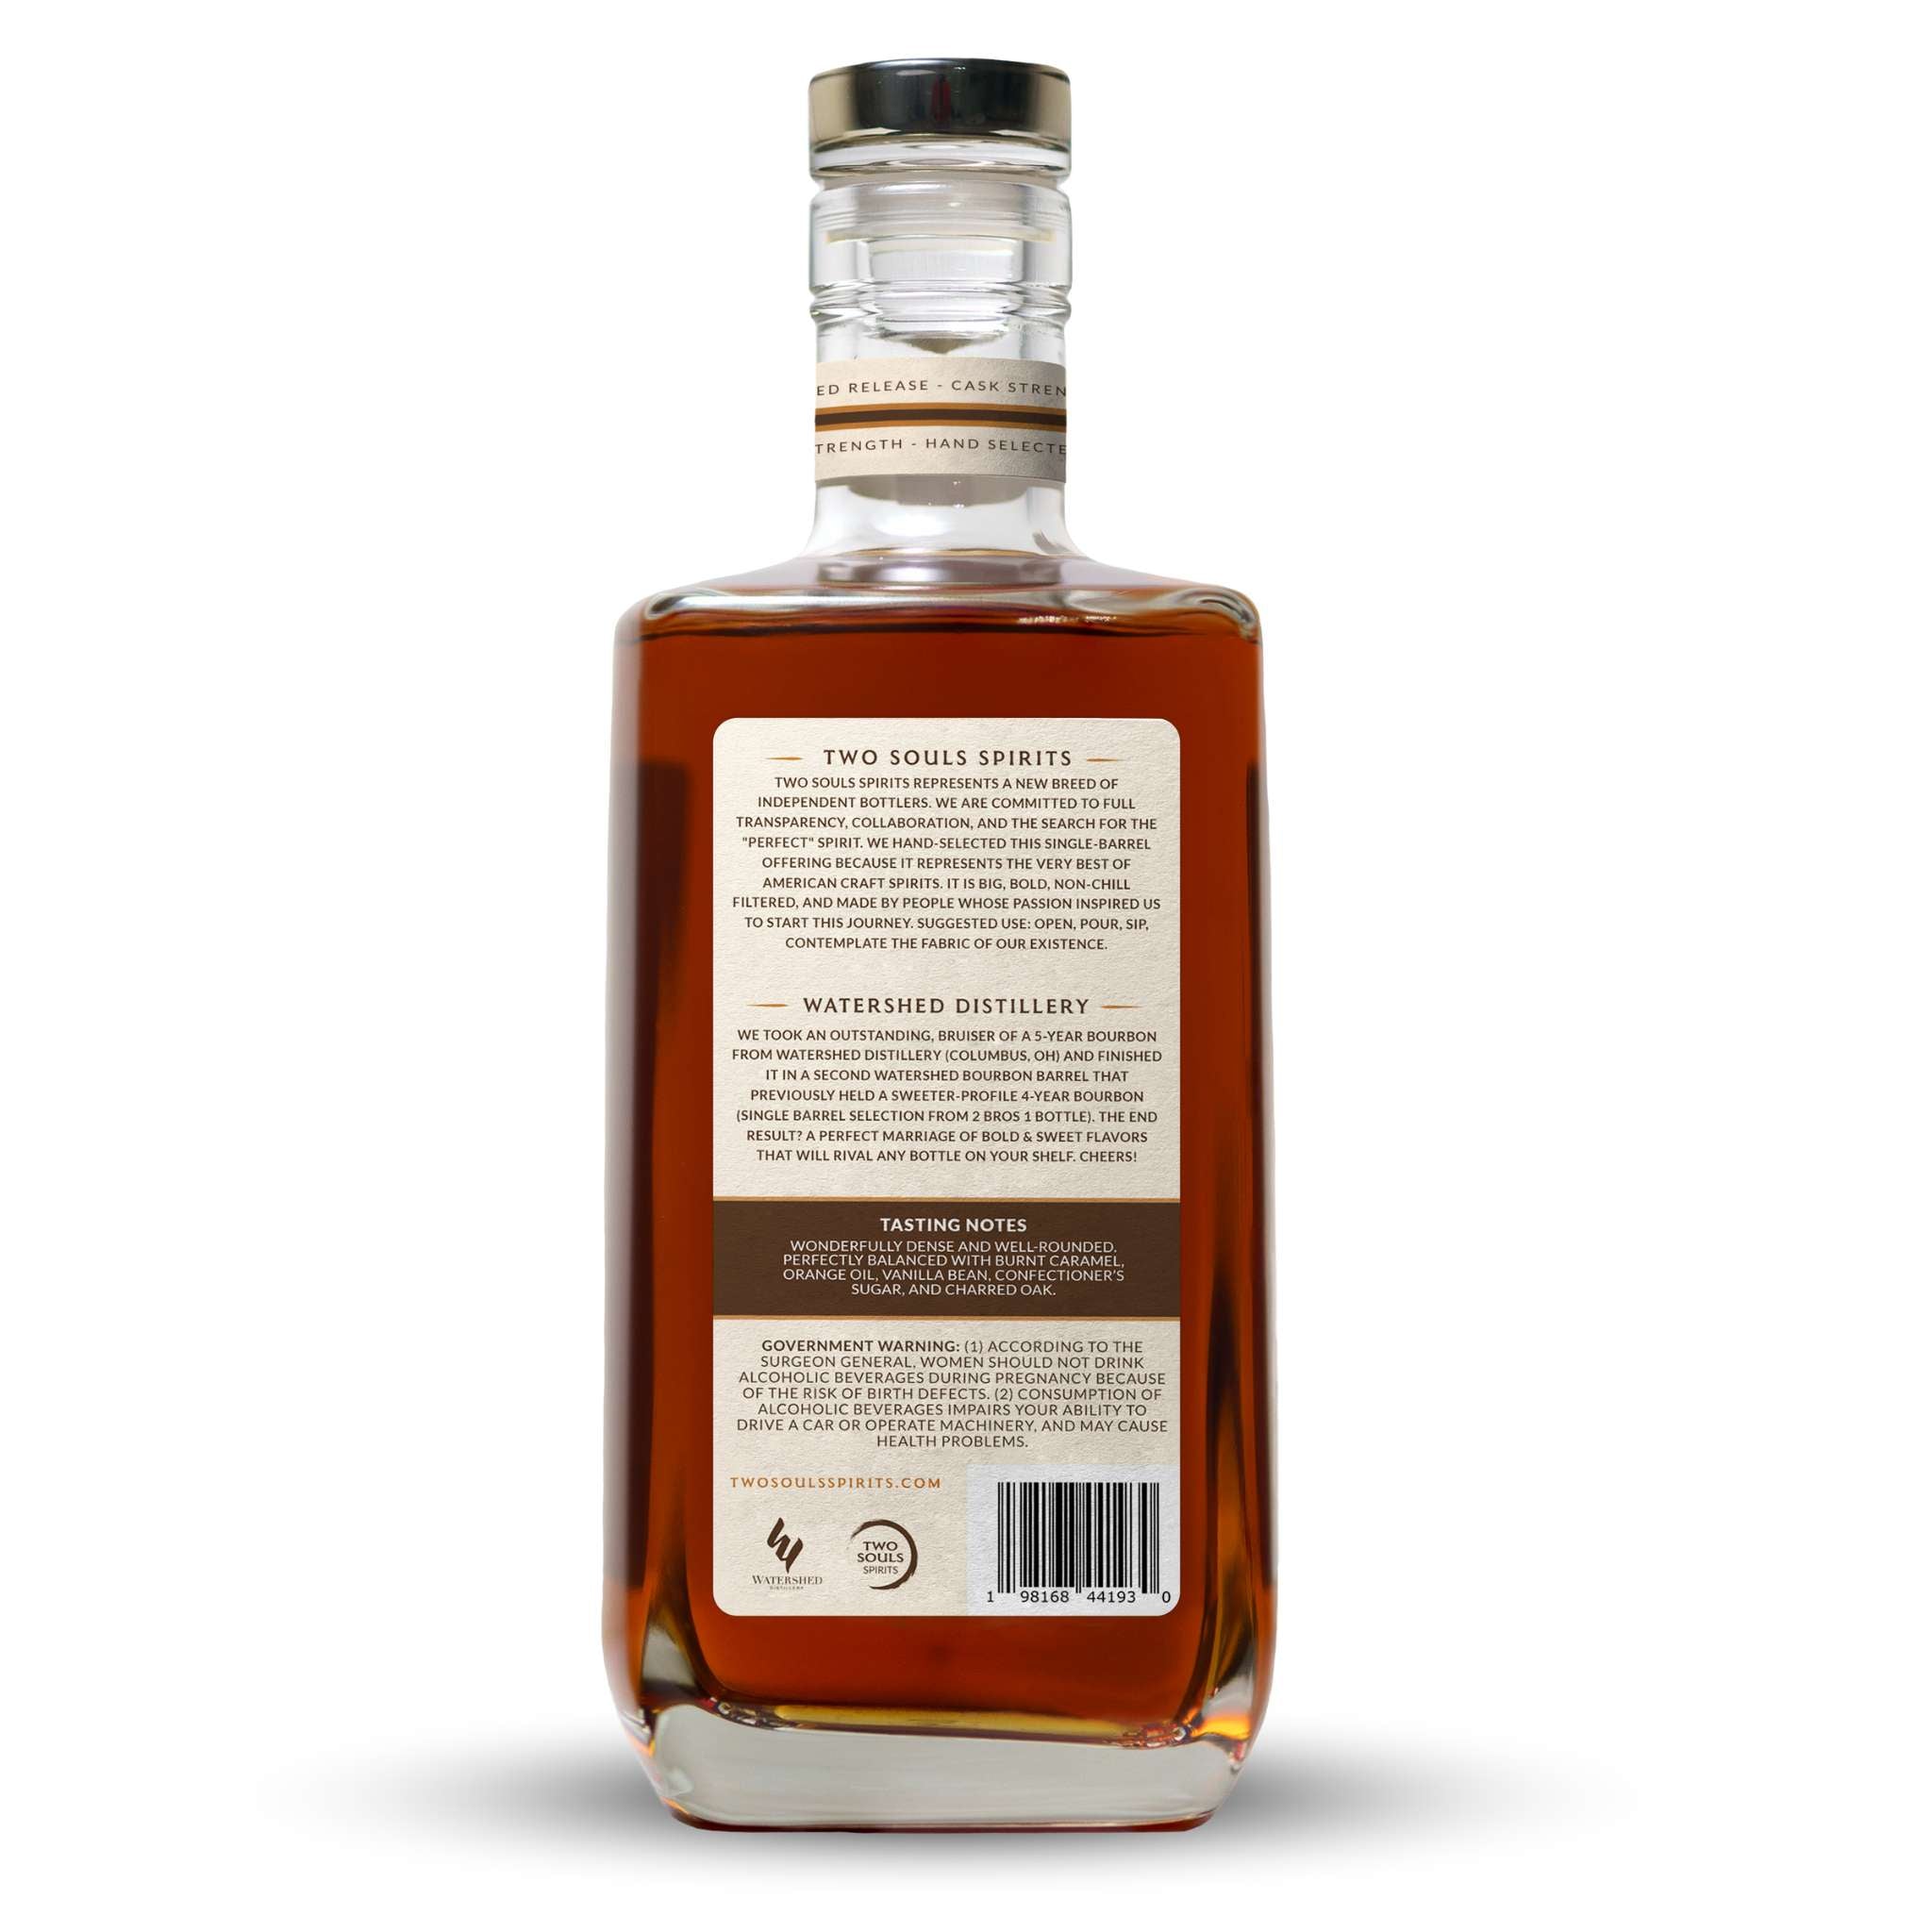 6-Year Ohio Double Barreled Bourbon Whiskey Featuring Watershed Distillery